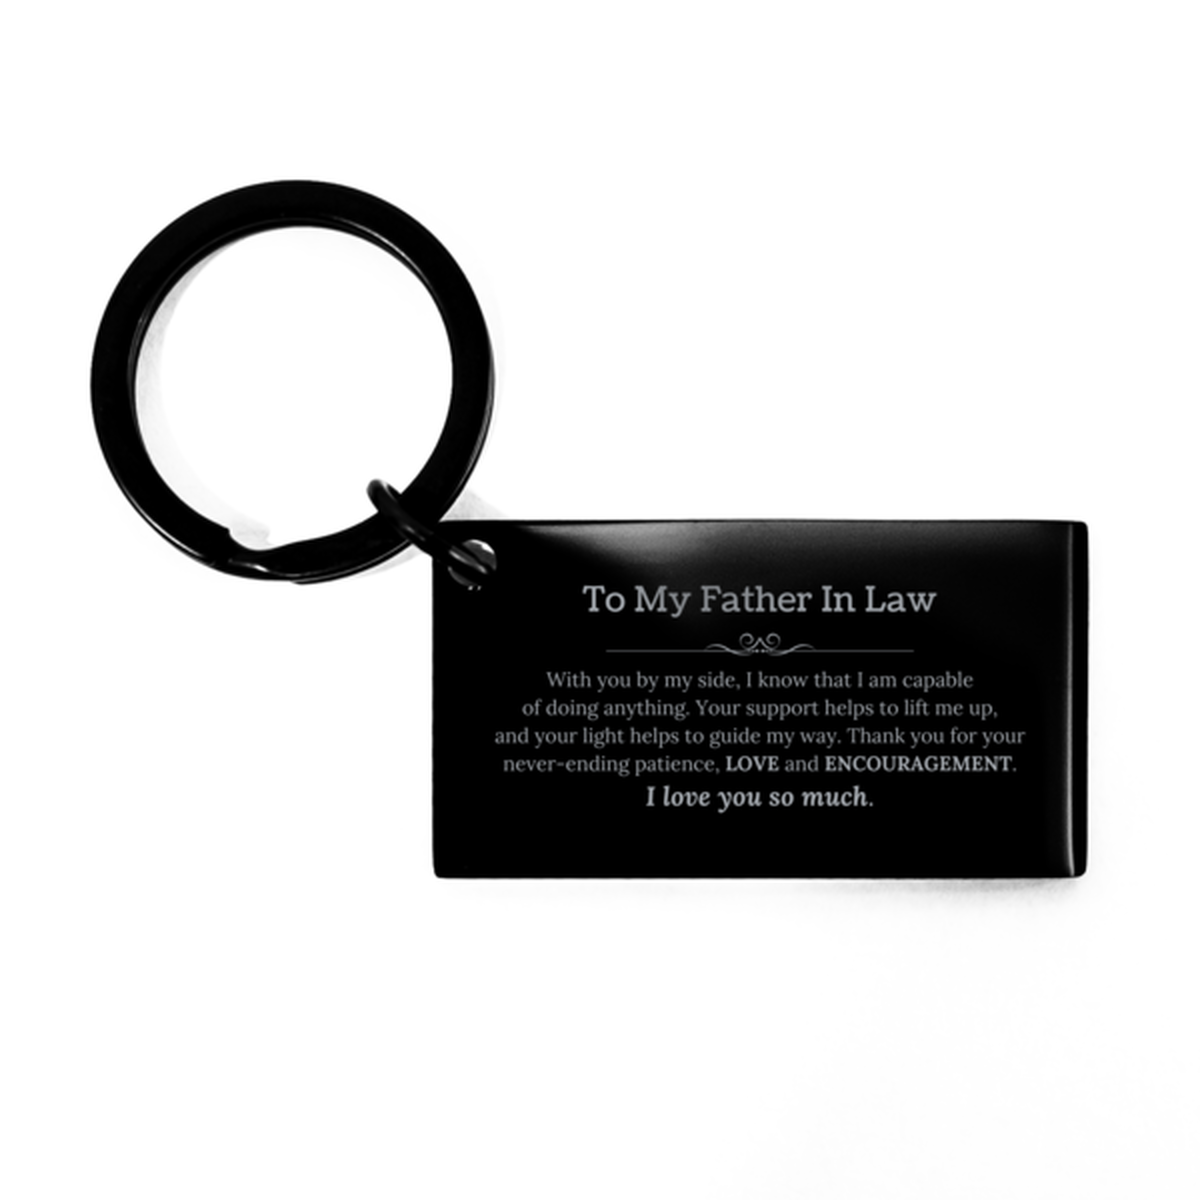 Appreciation Father In Law Keychain Gifts, To My Father In Law Birthday Christmas Wedding Keepsake Gifts for Father In Law With you by my side, I know that I am capable of doing anything. I love you so much